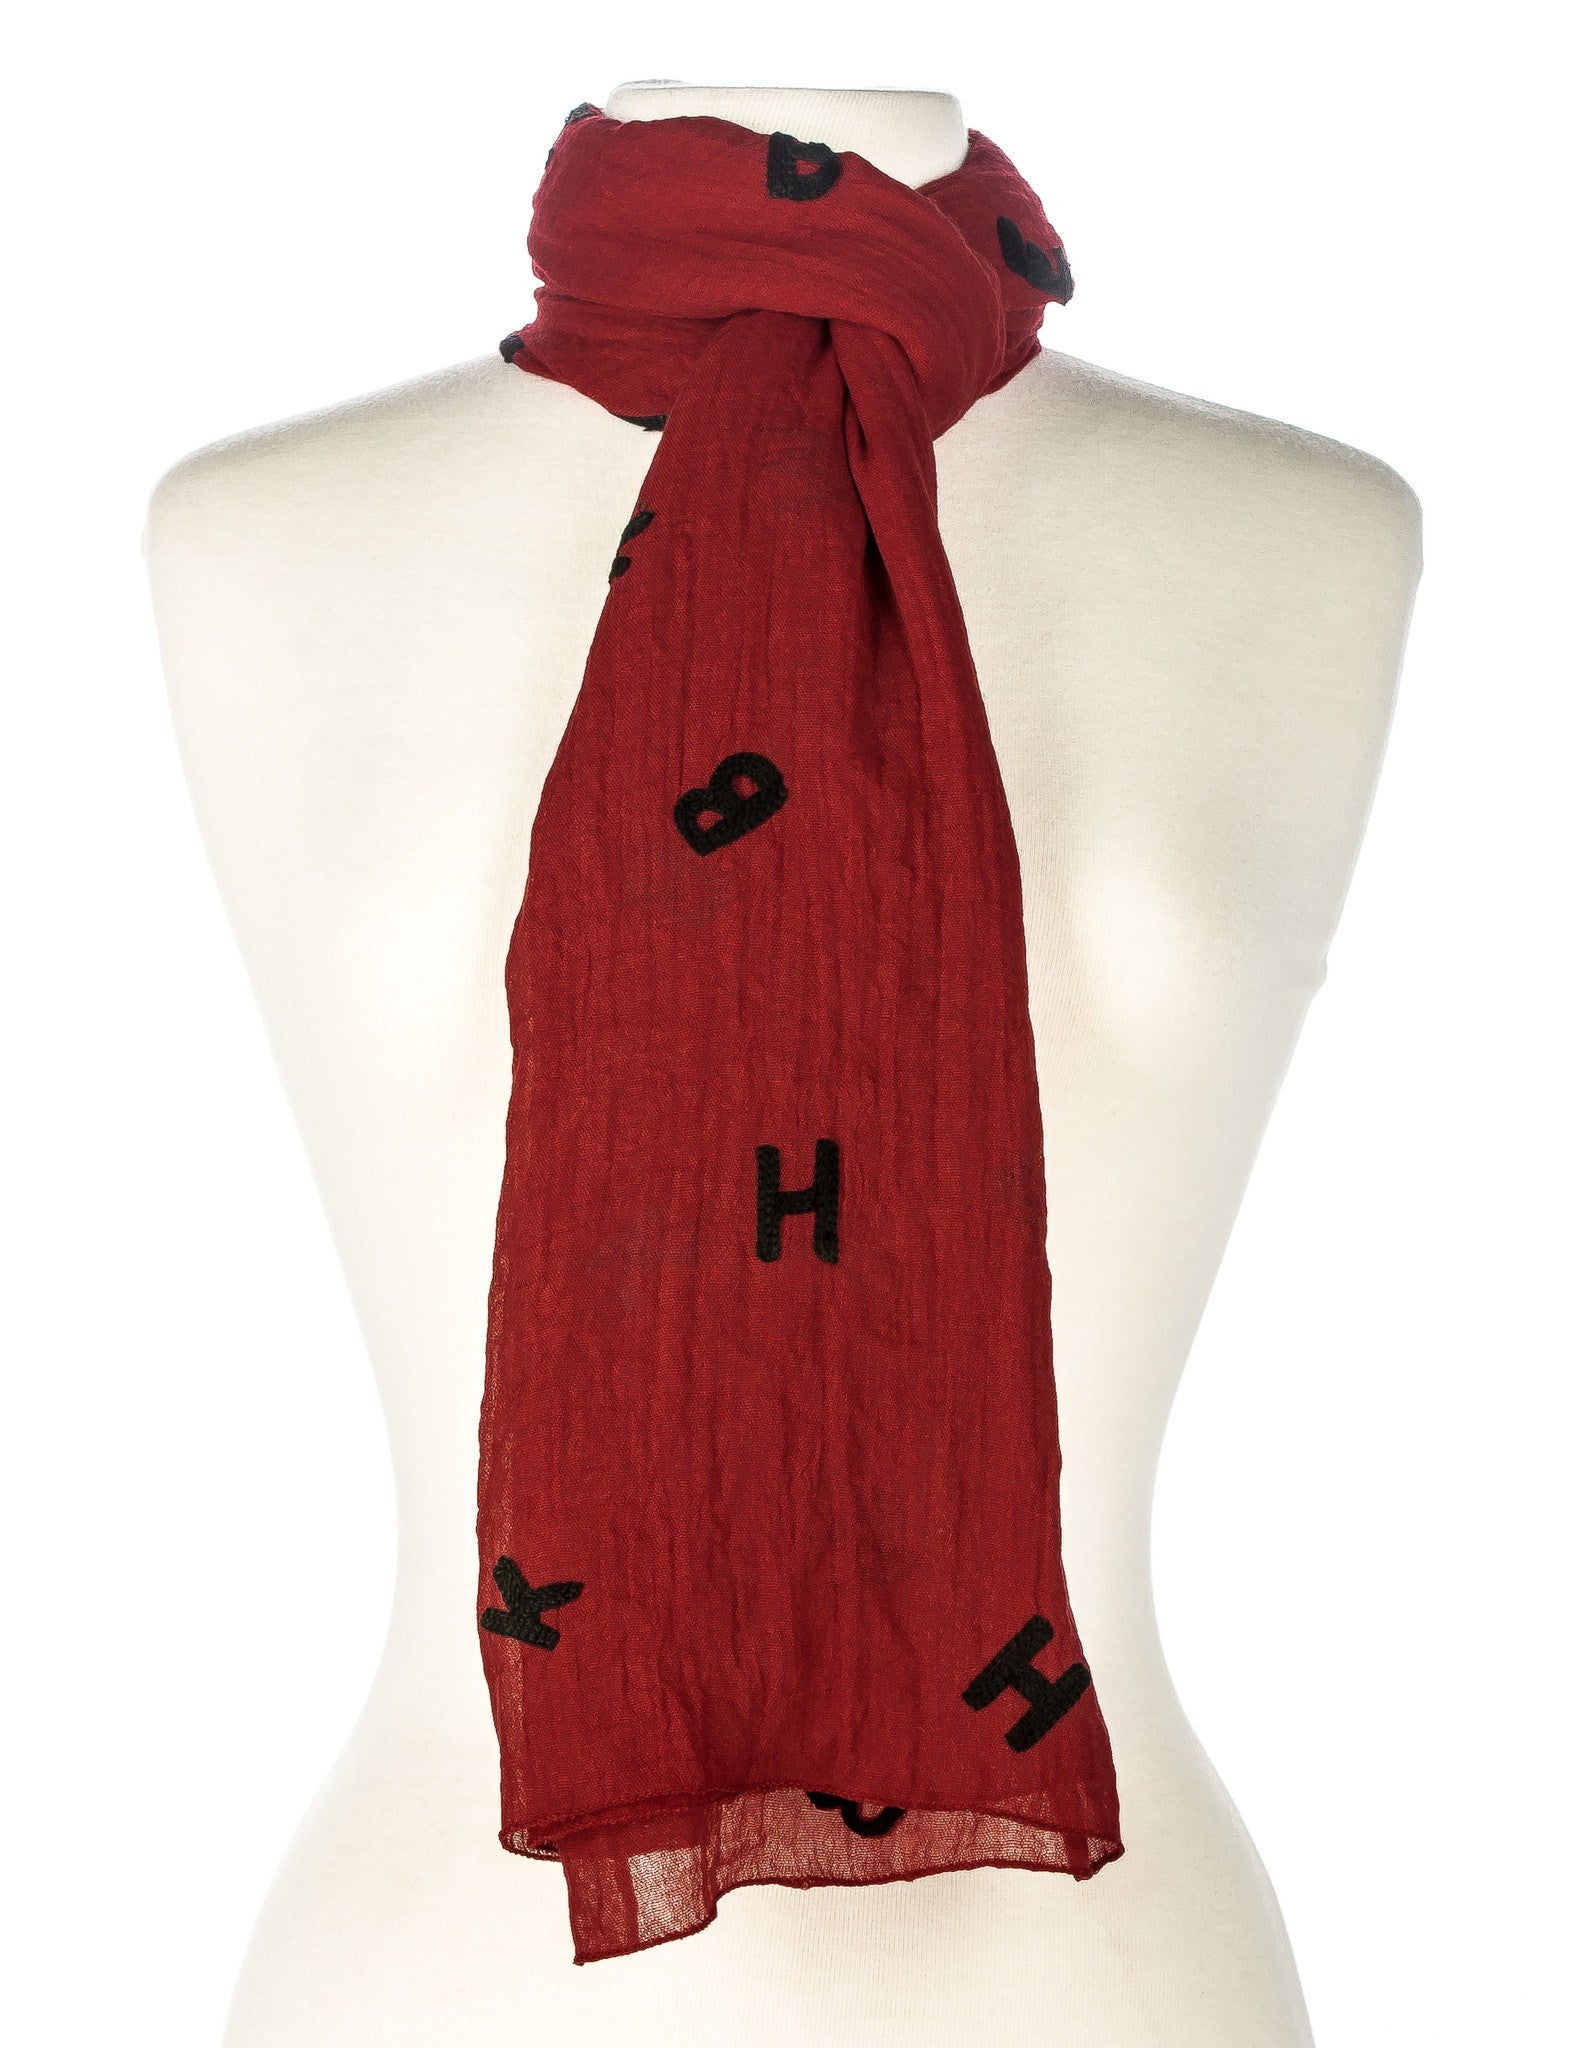 Embroidered Alphabets Spring Scarf